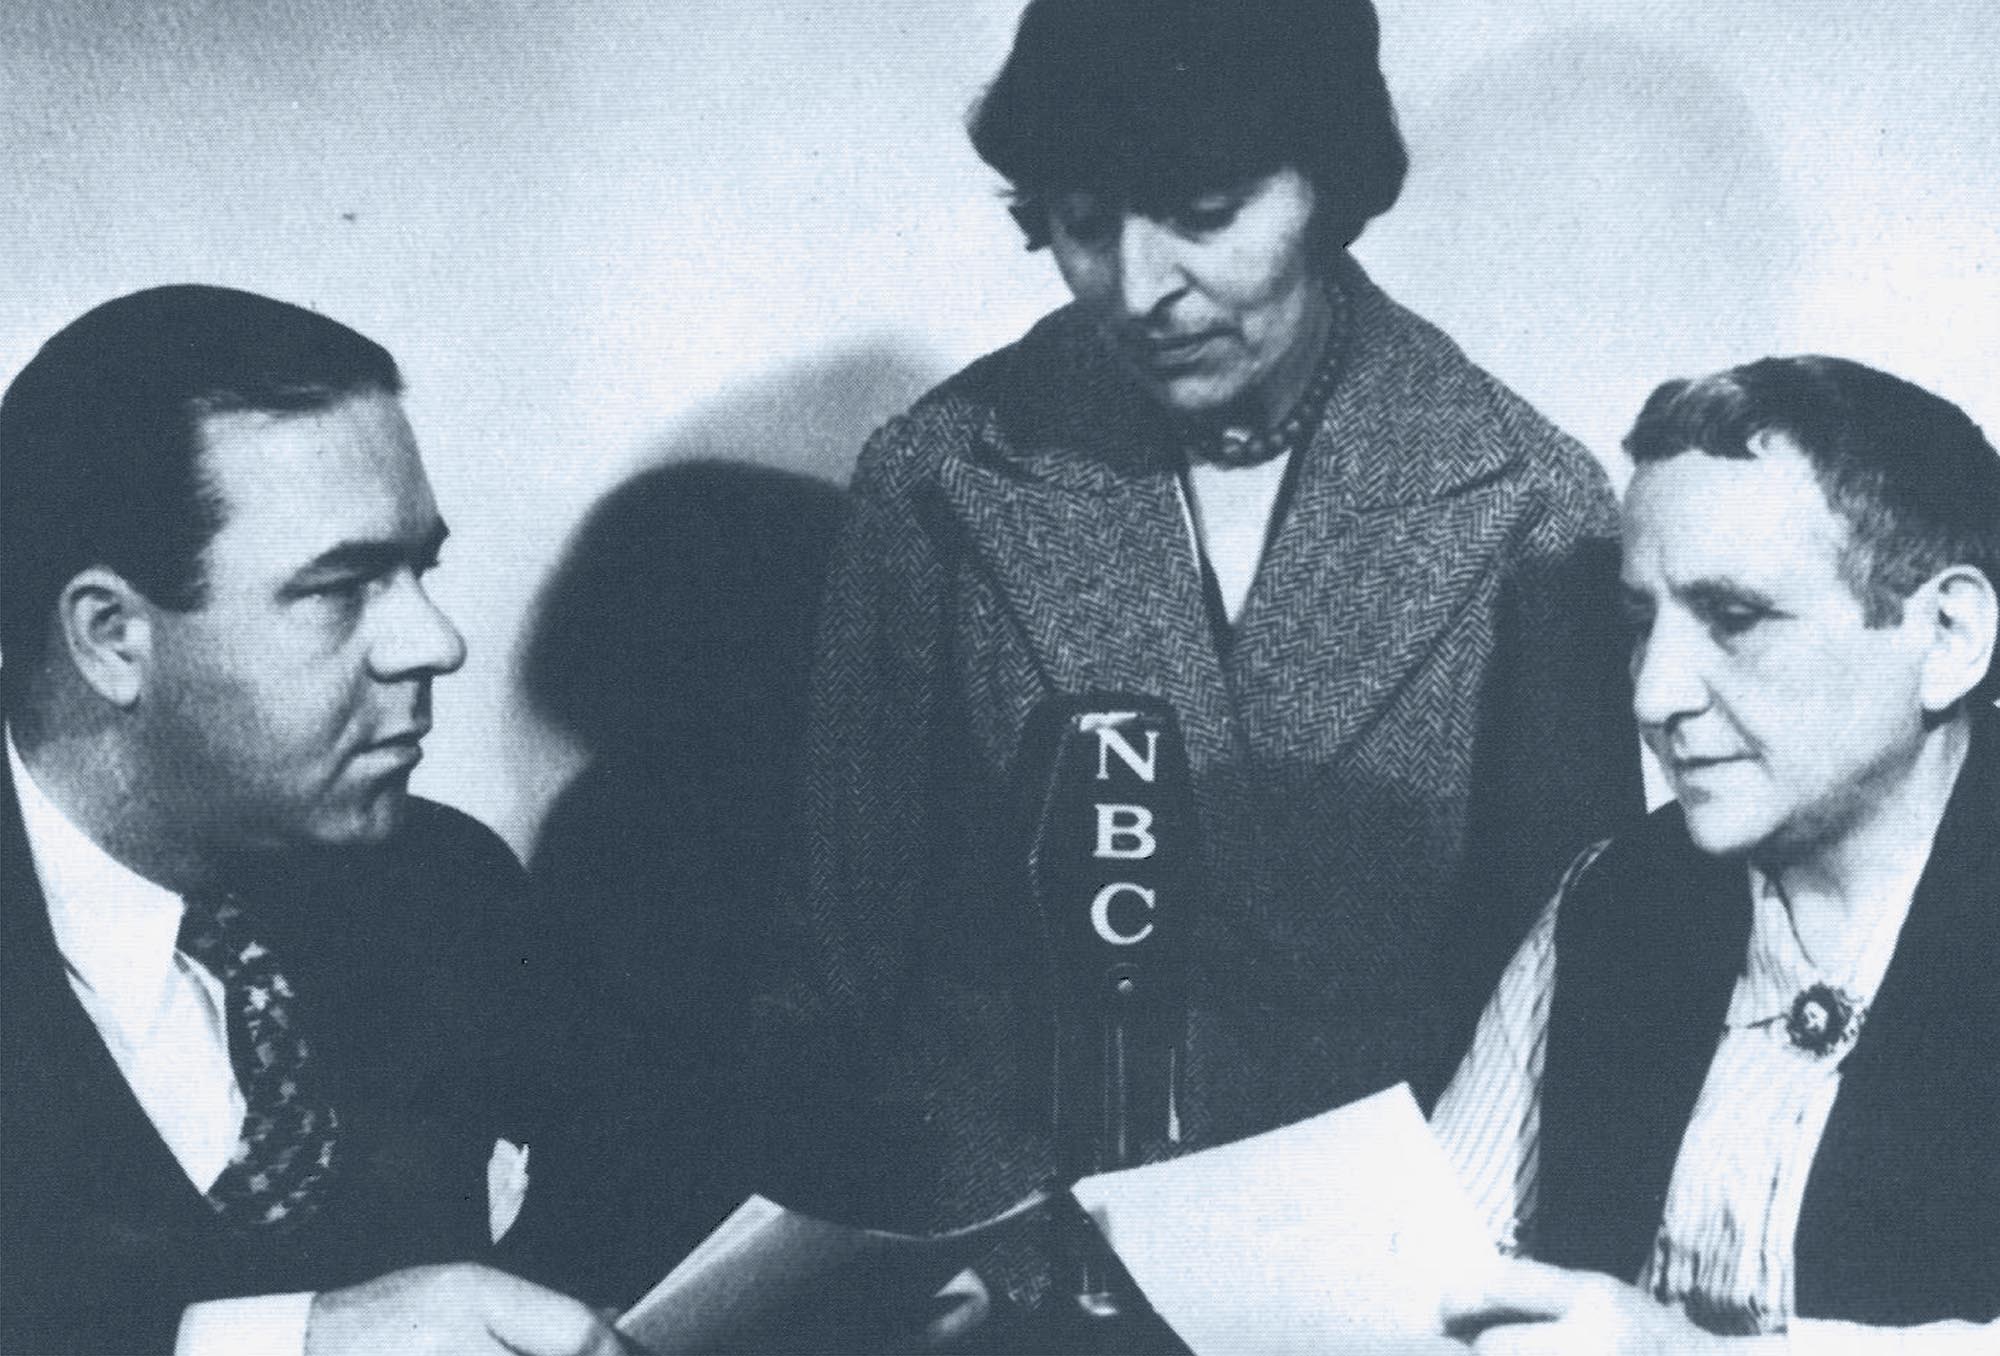 Gertrude Stein & Alice B. Toklas give an NBC interview.